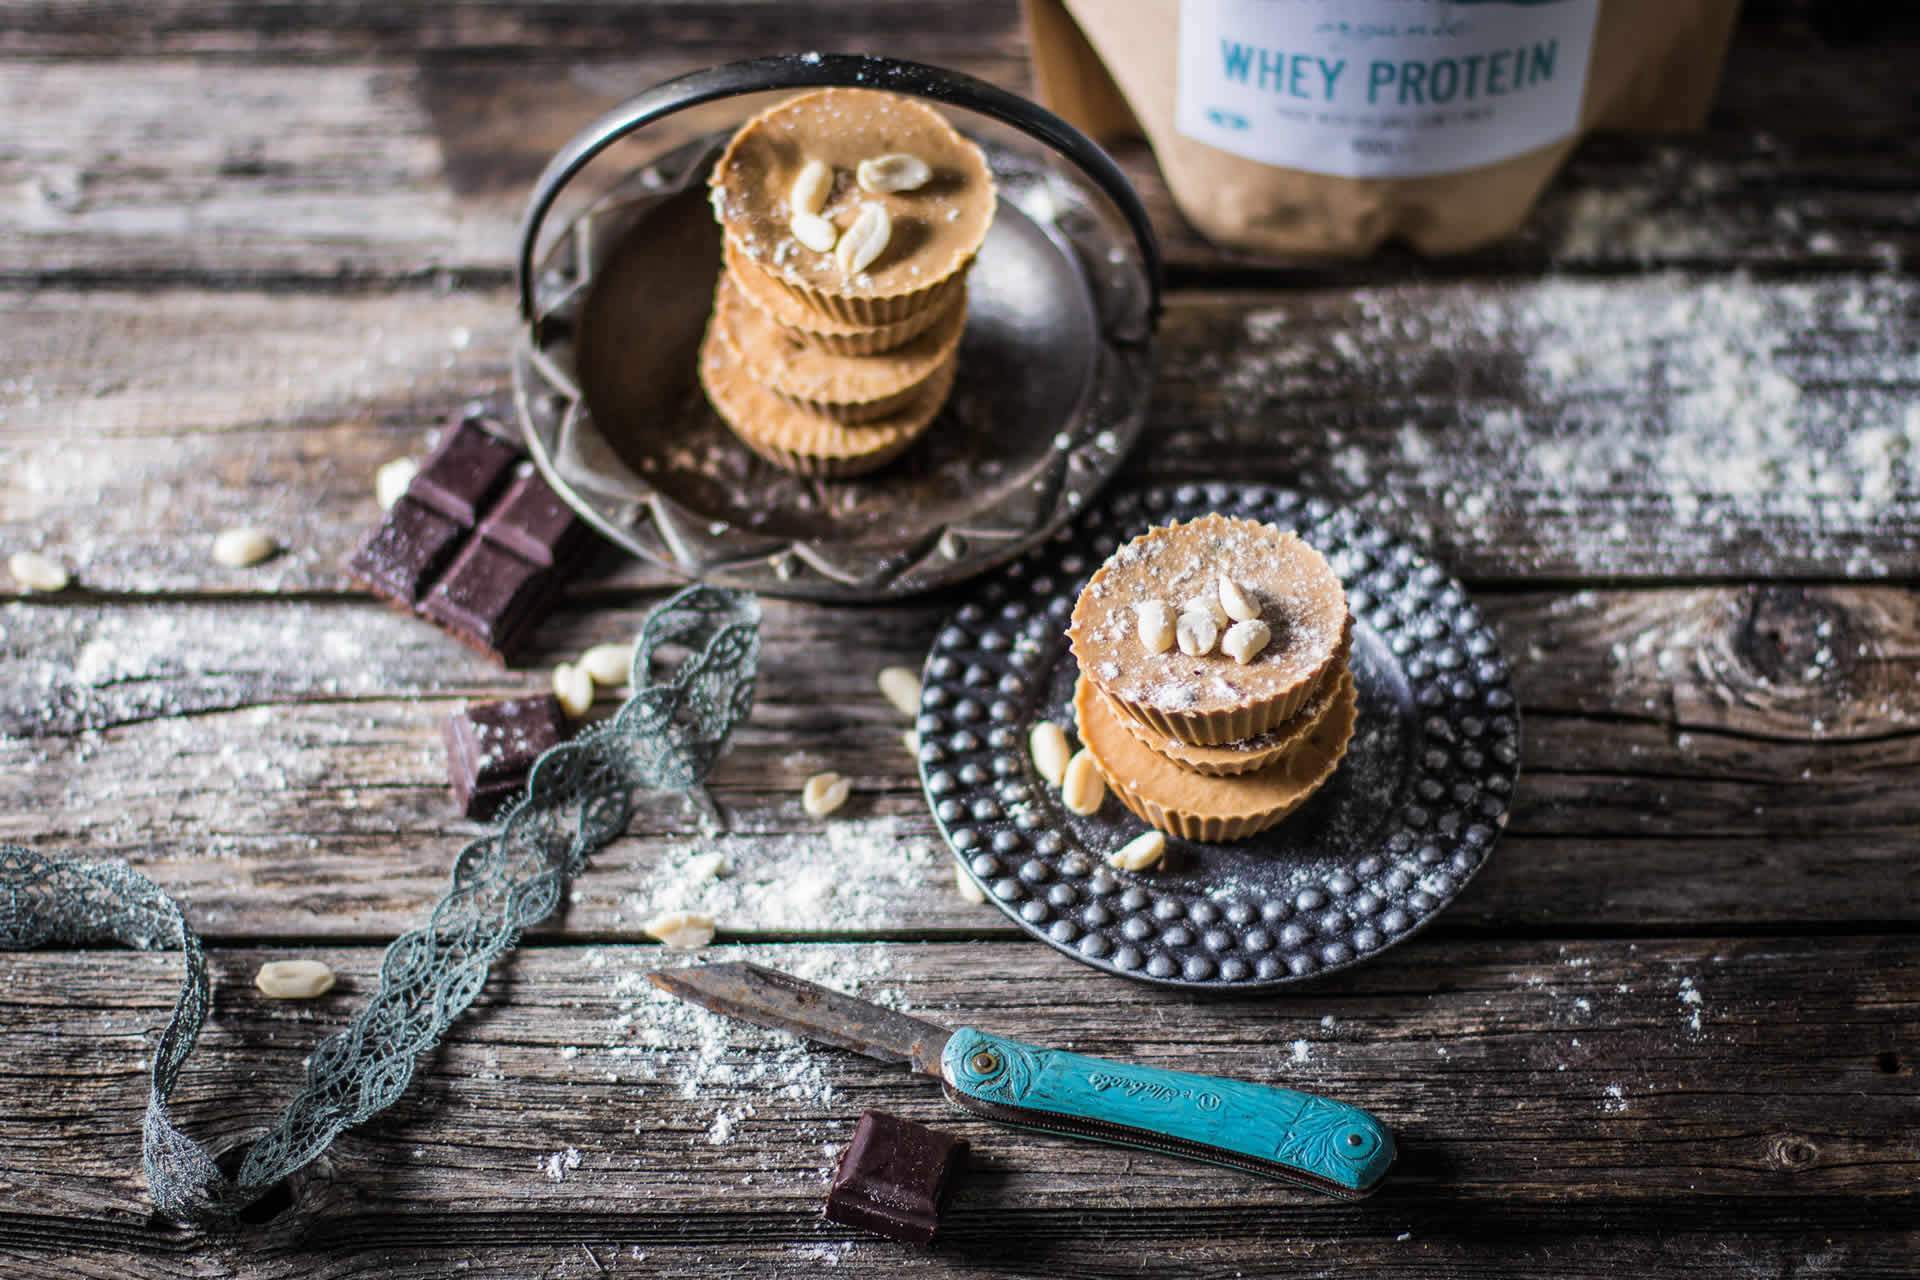 Peanut Butter & Whey Protein Cups